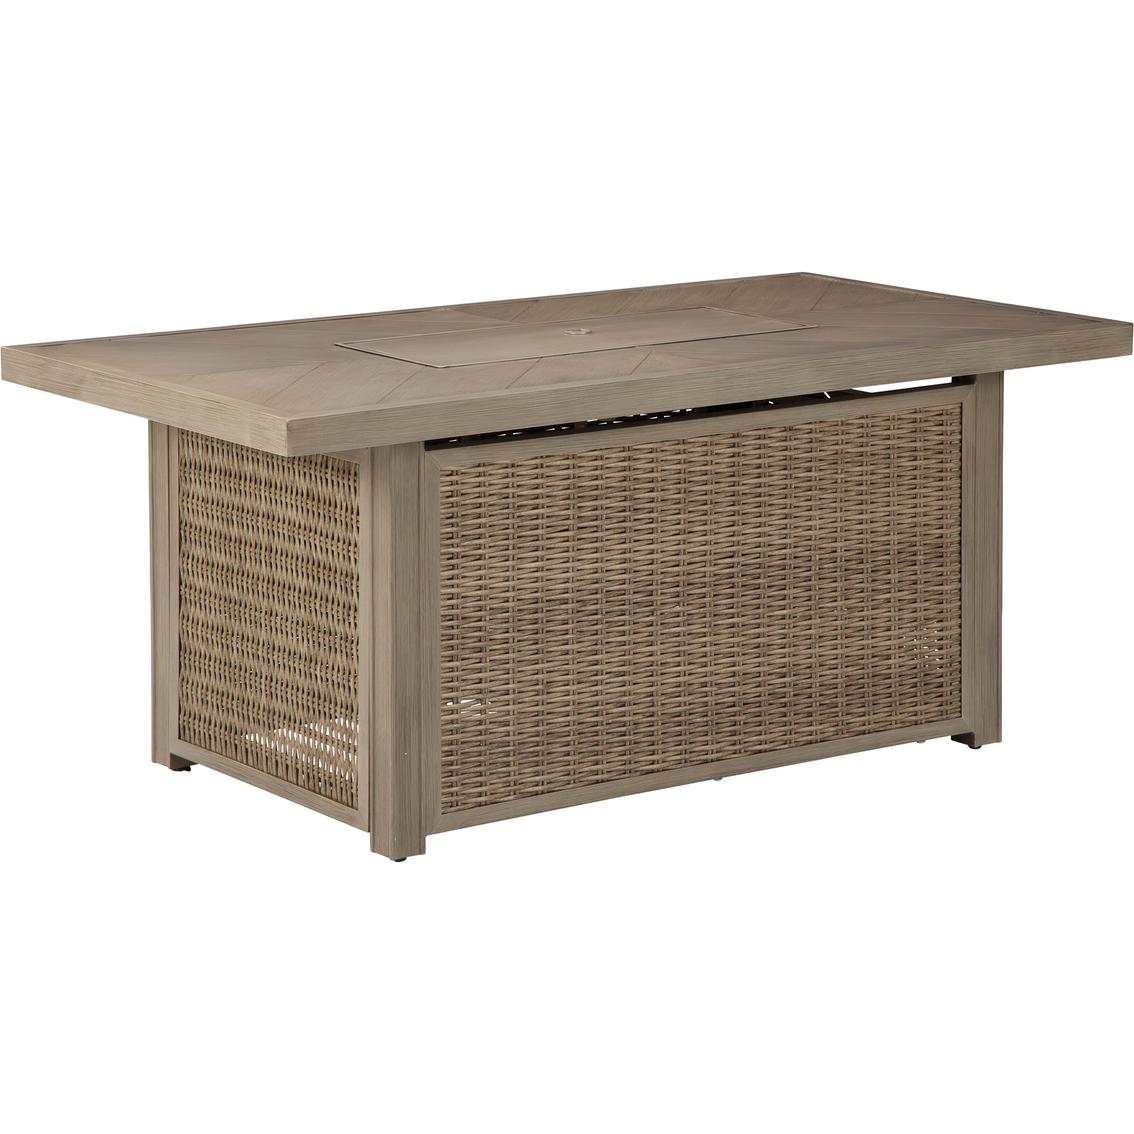 Signature Design by Ashley Calworth Outdoor 6 pc. Set with Firepit Table - Image 8 of 9